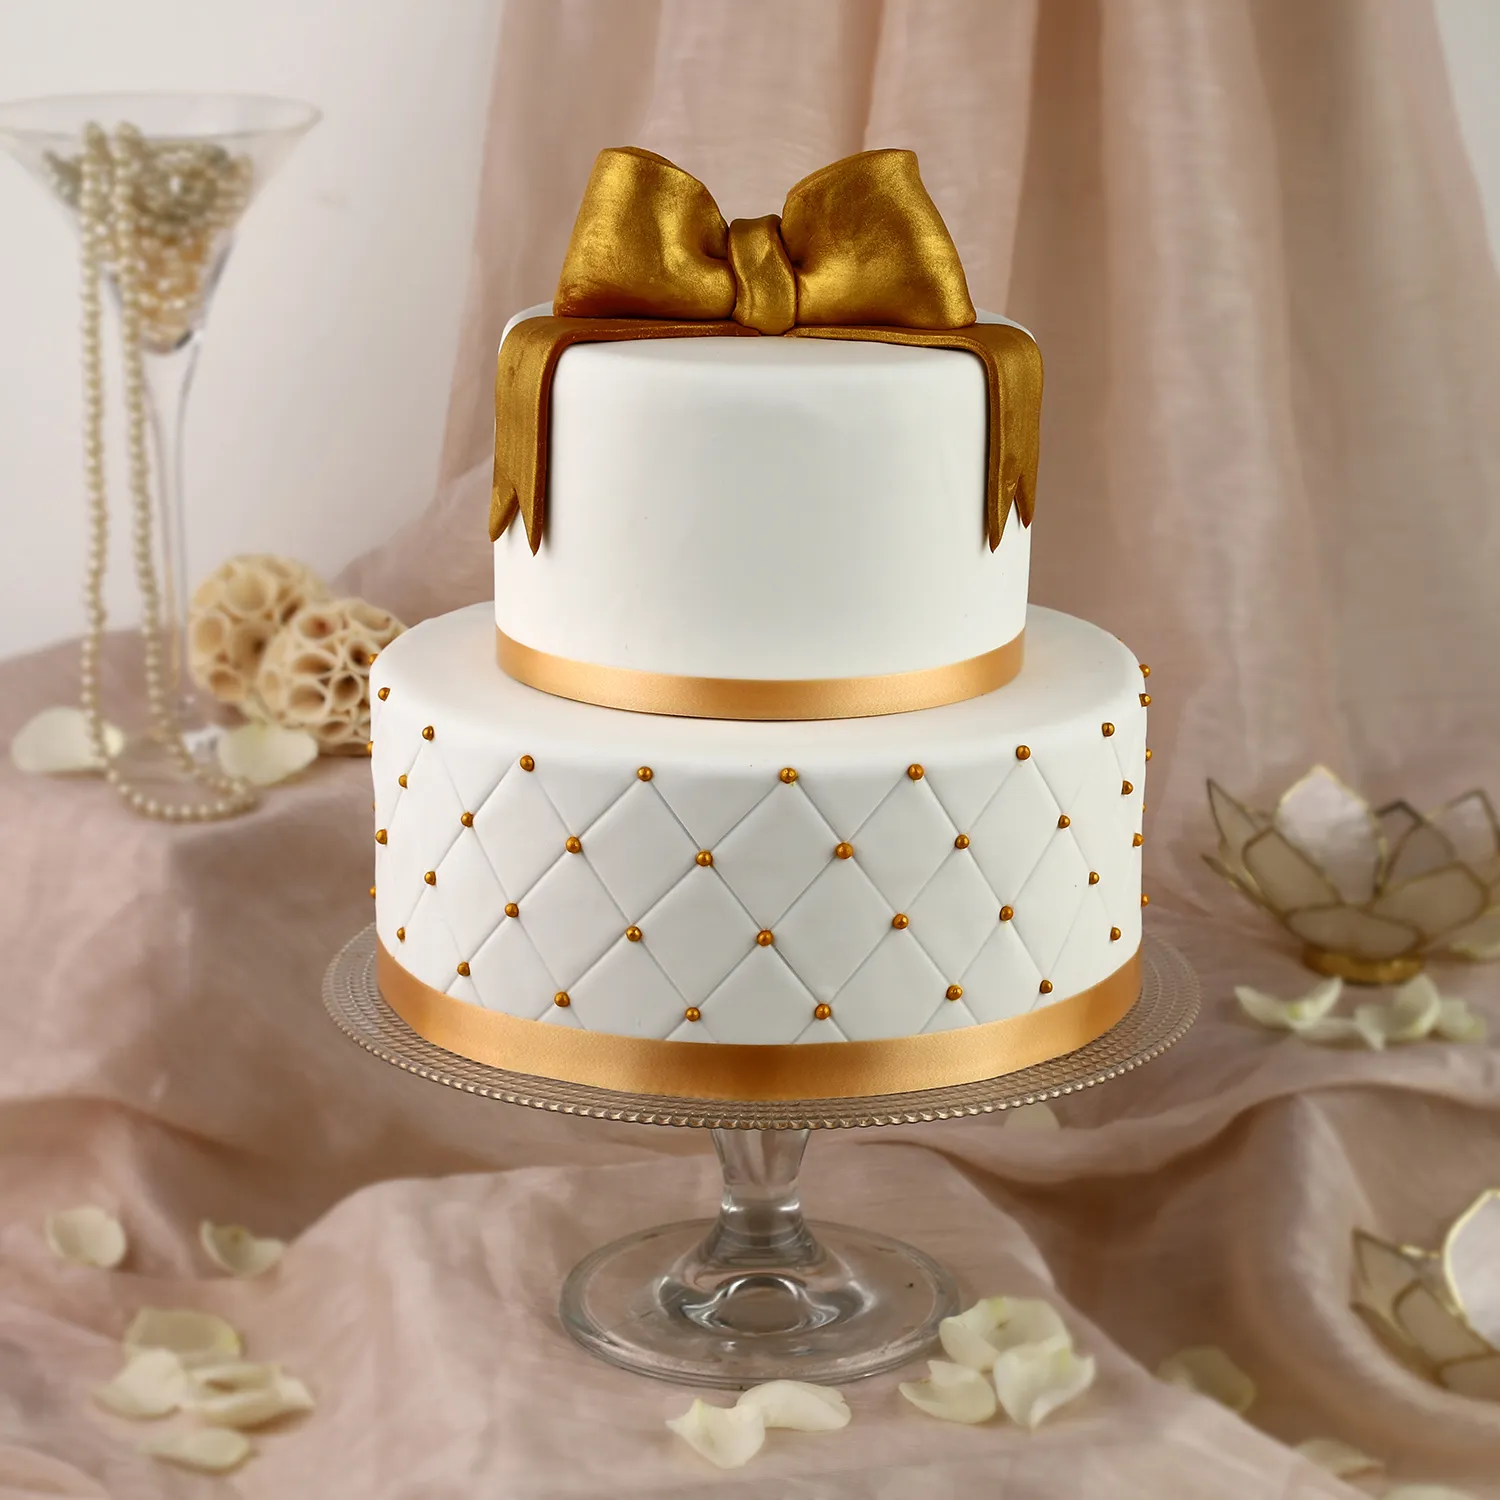 Tiers of Delight: Three-Tiered Wedding Cake - 5Kg